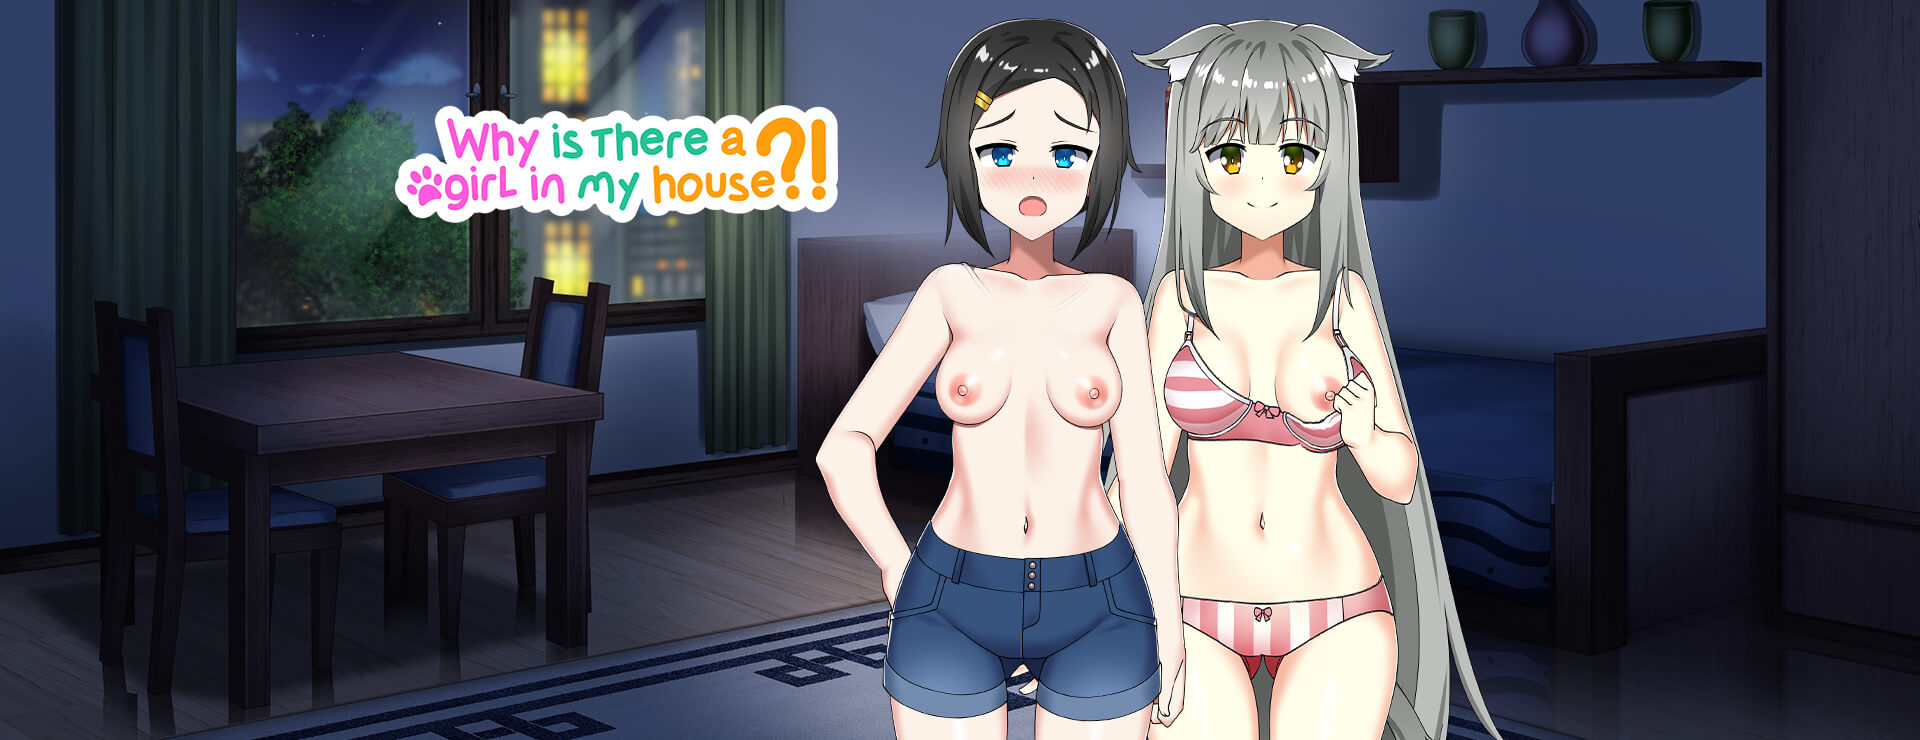 Why Is There A Girl In My House?! - ビジュアルノベル ゲーム